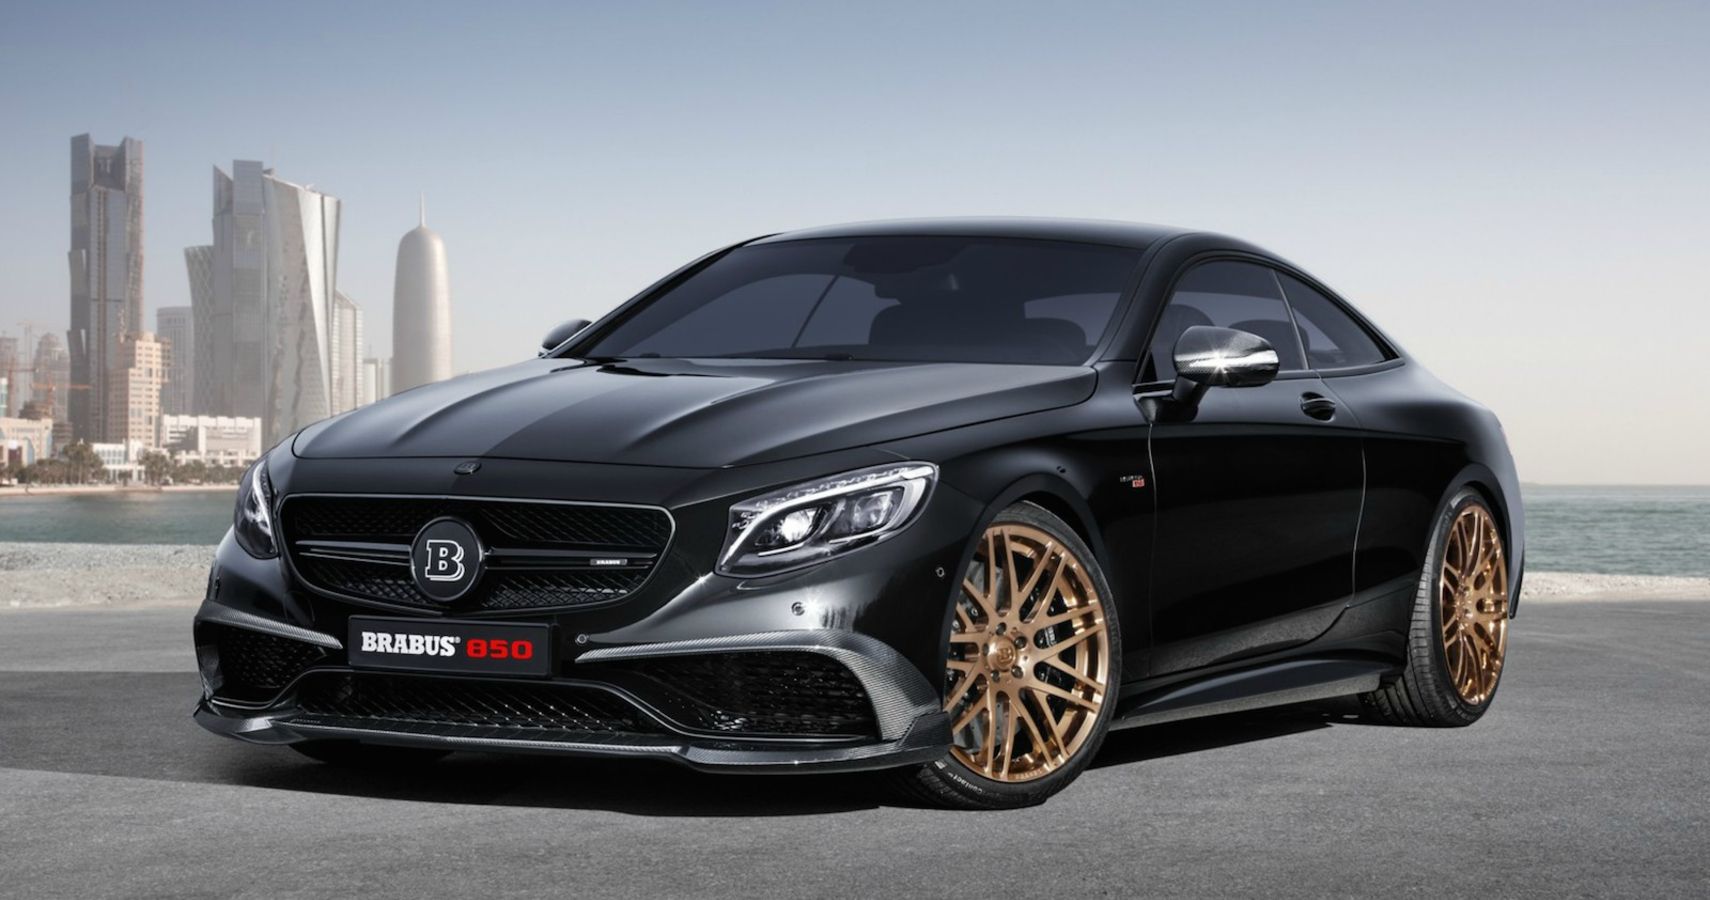 The Brabus 850 Coupe